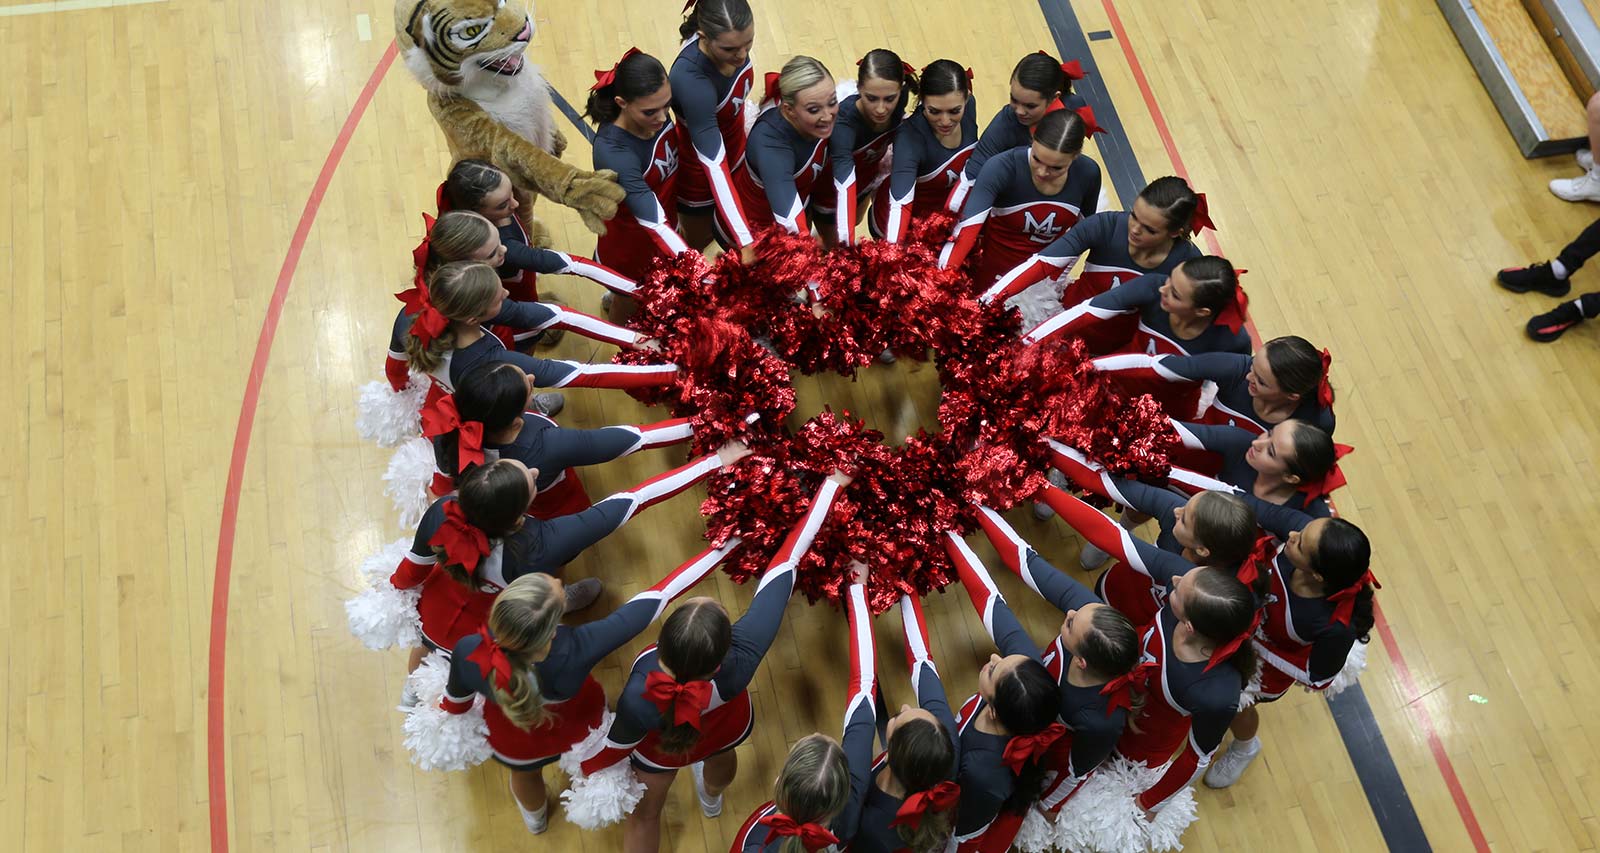 Cheer team circles with hands toward the center of the circle.